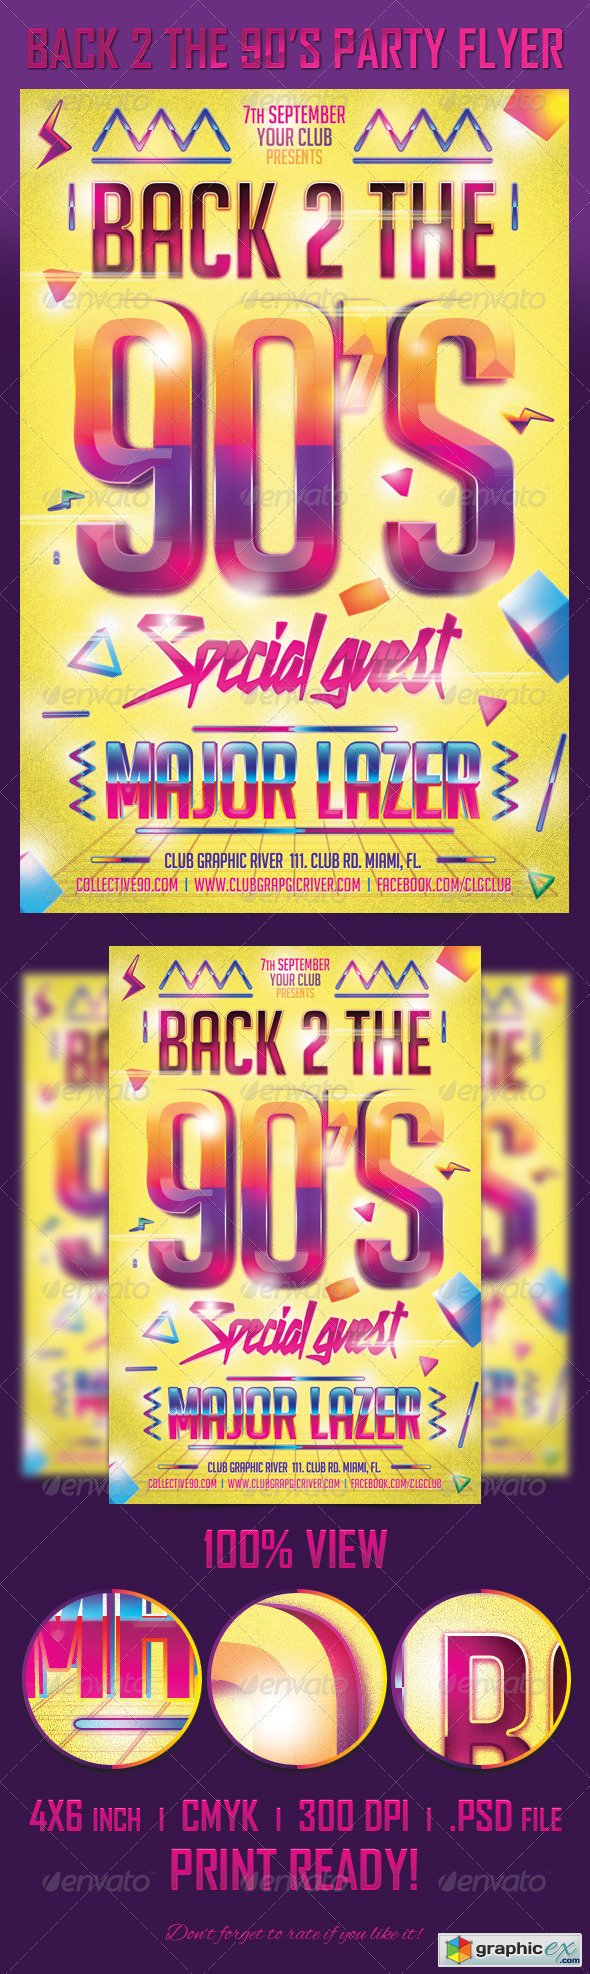 Back 2 the 90's Party Flyer Template 5447520